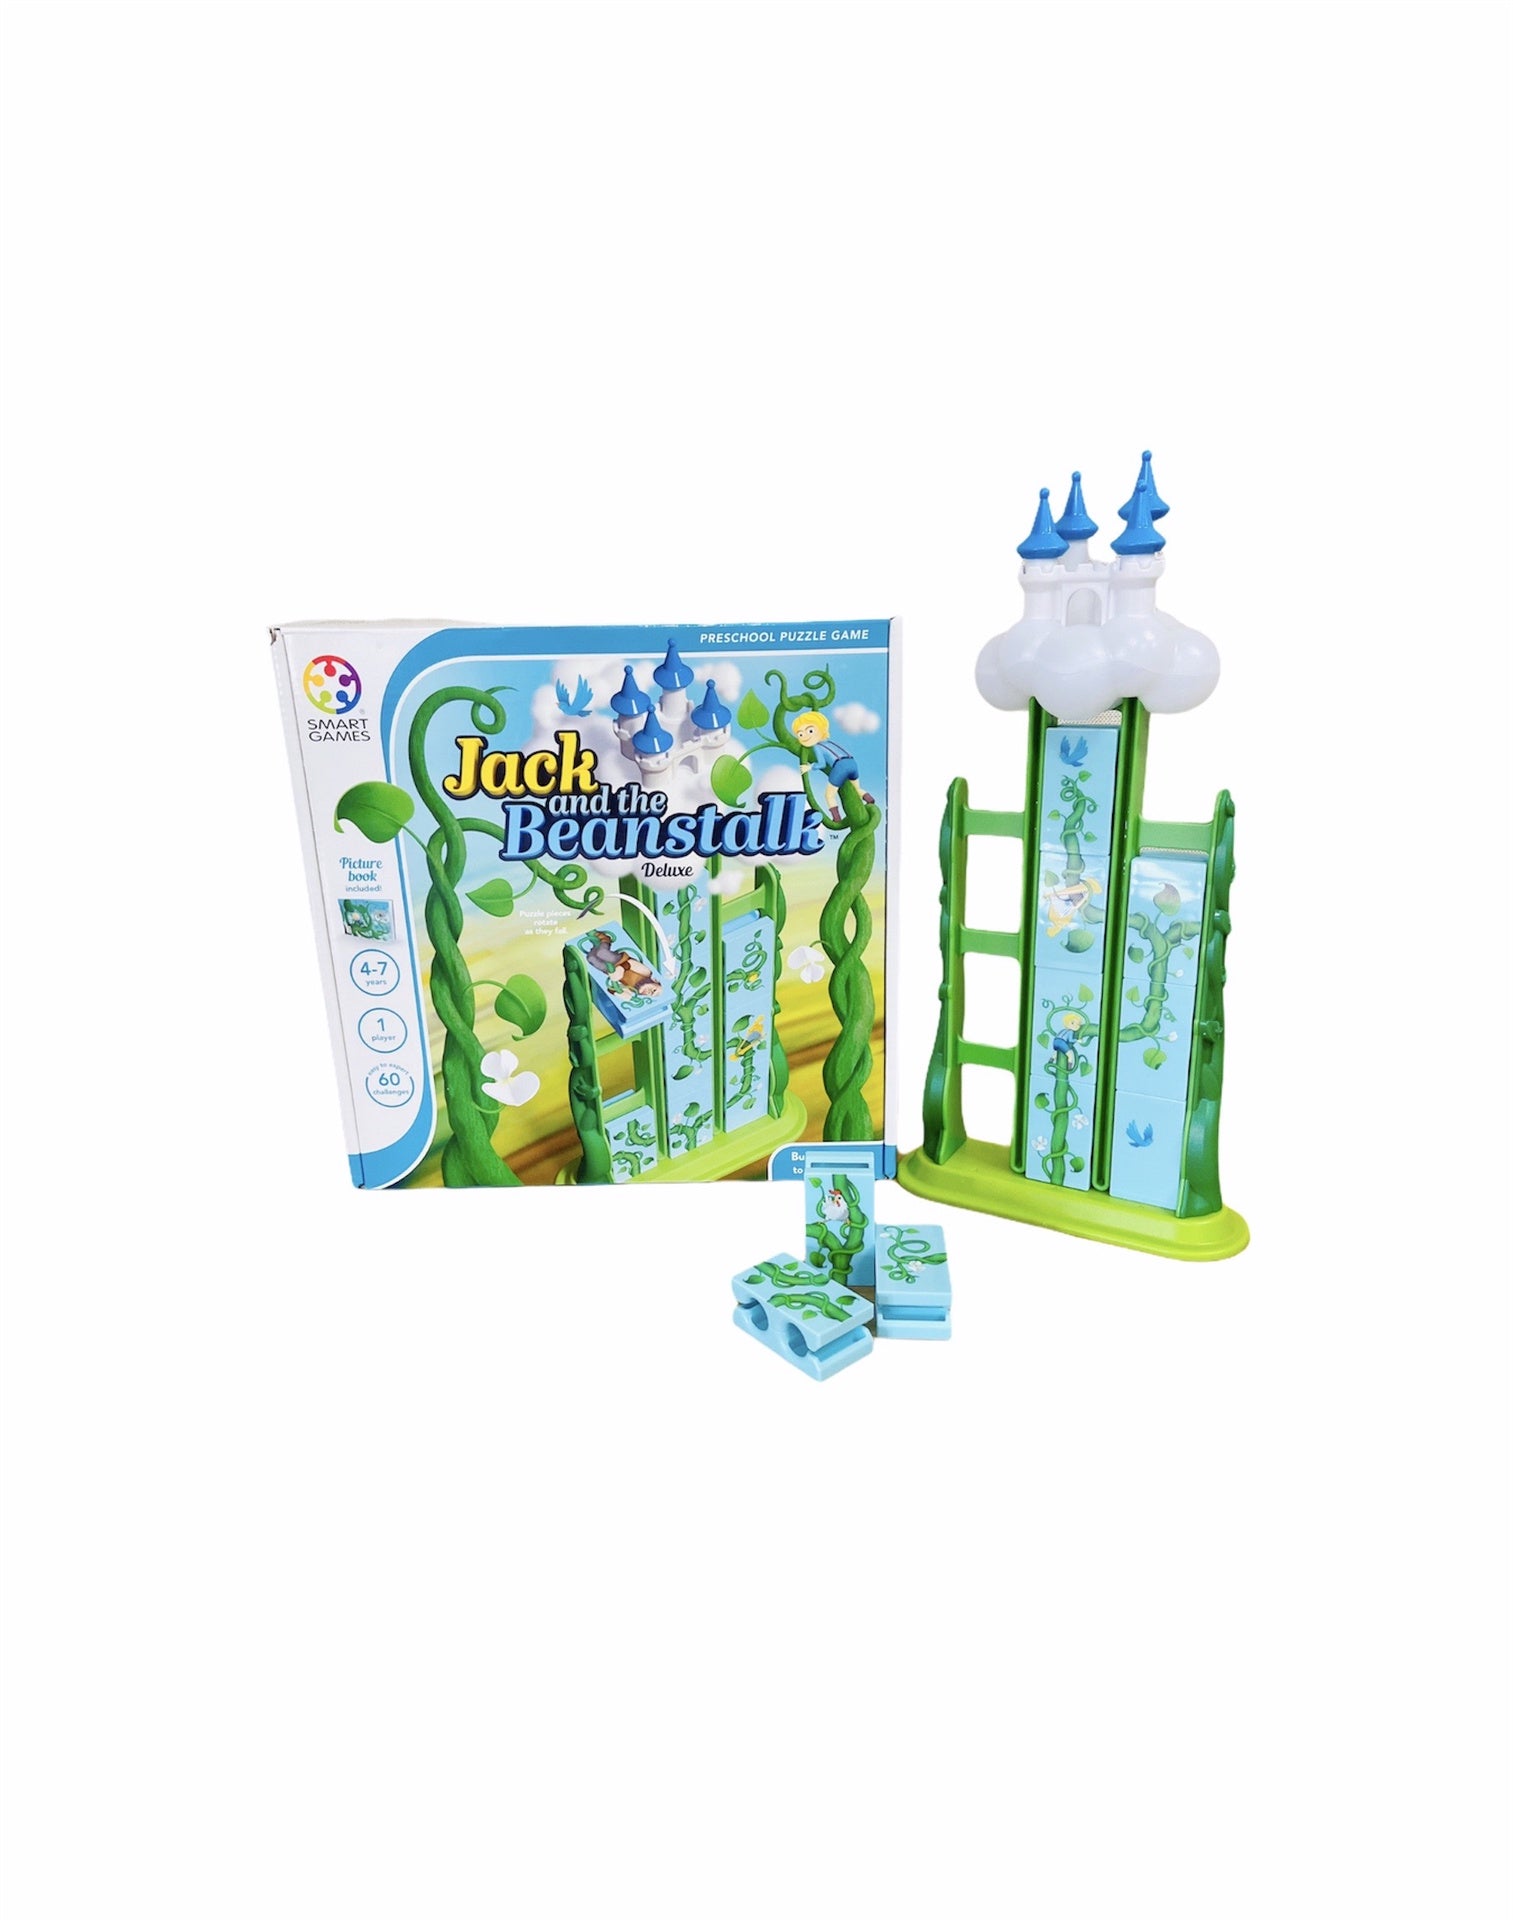 Smart Games Jack and the Beanstalk Deluxe